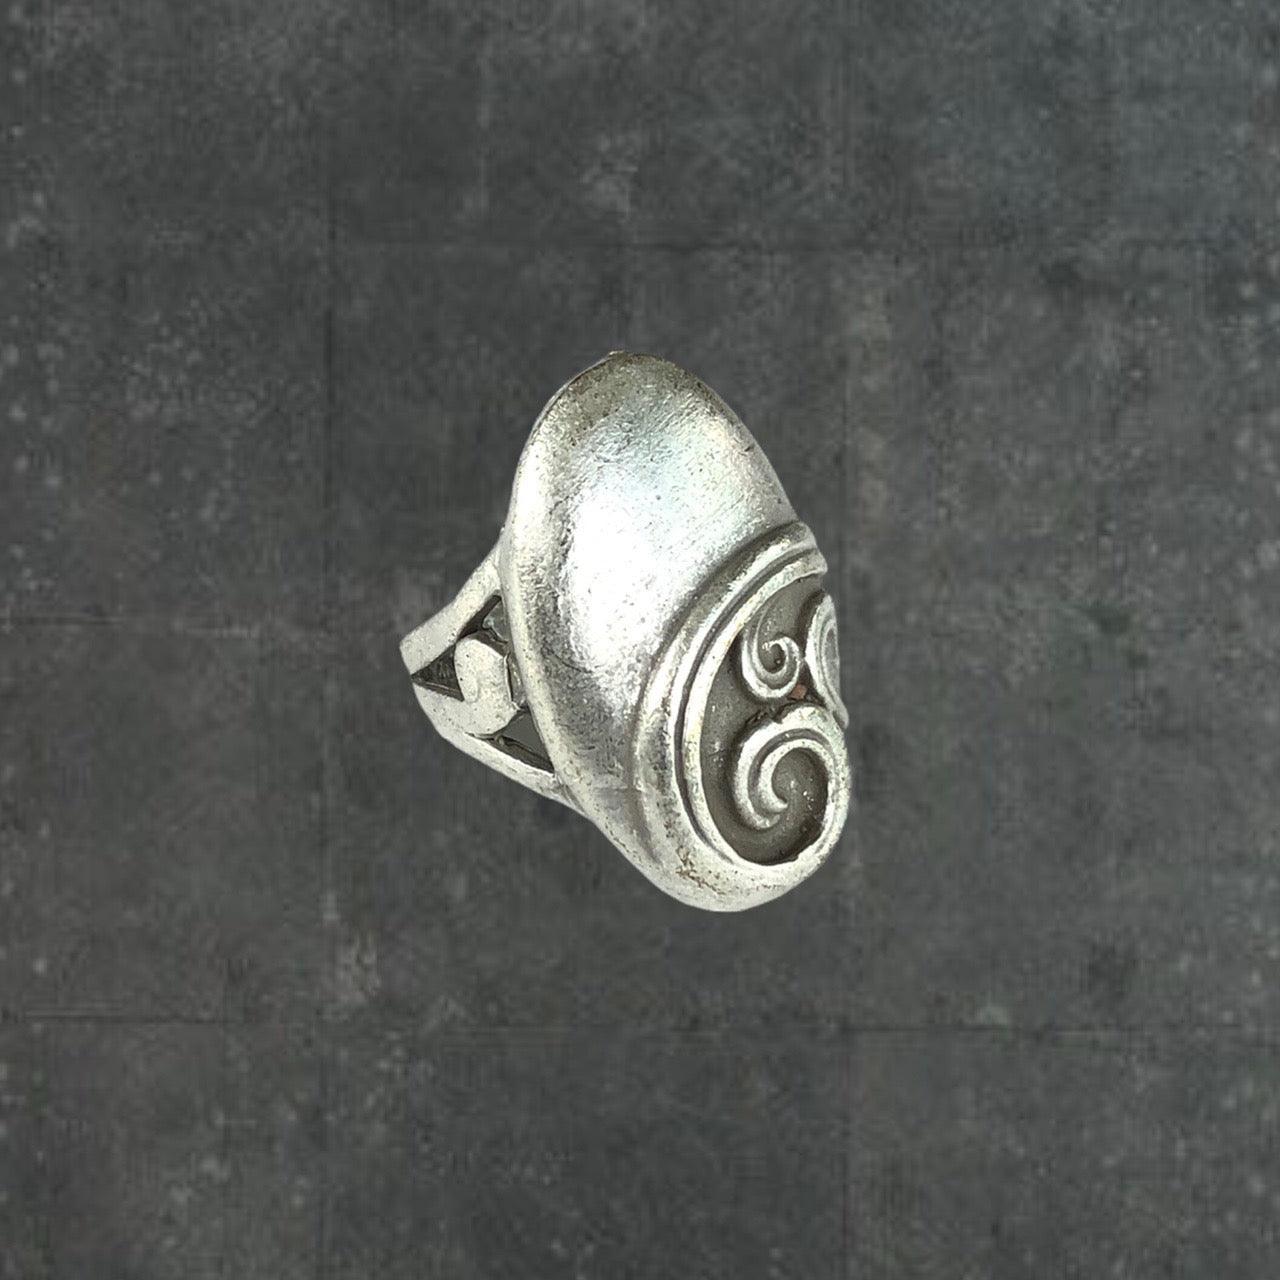 Antique Ring - Known Source